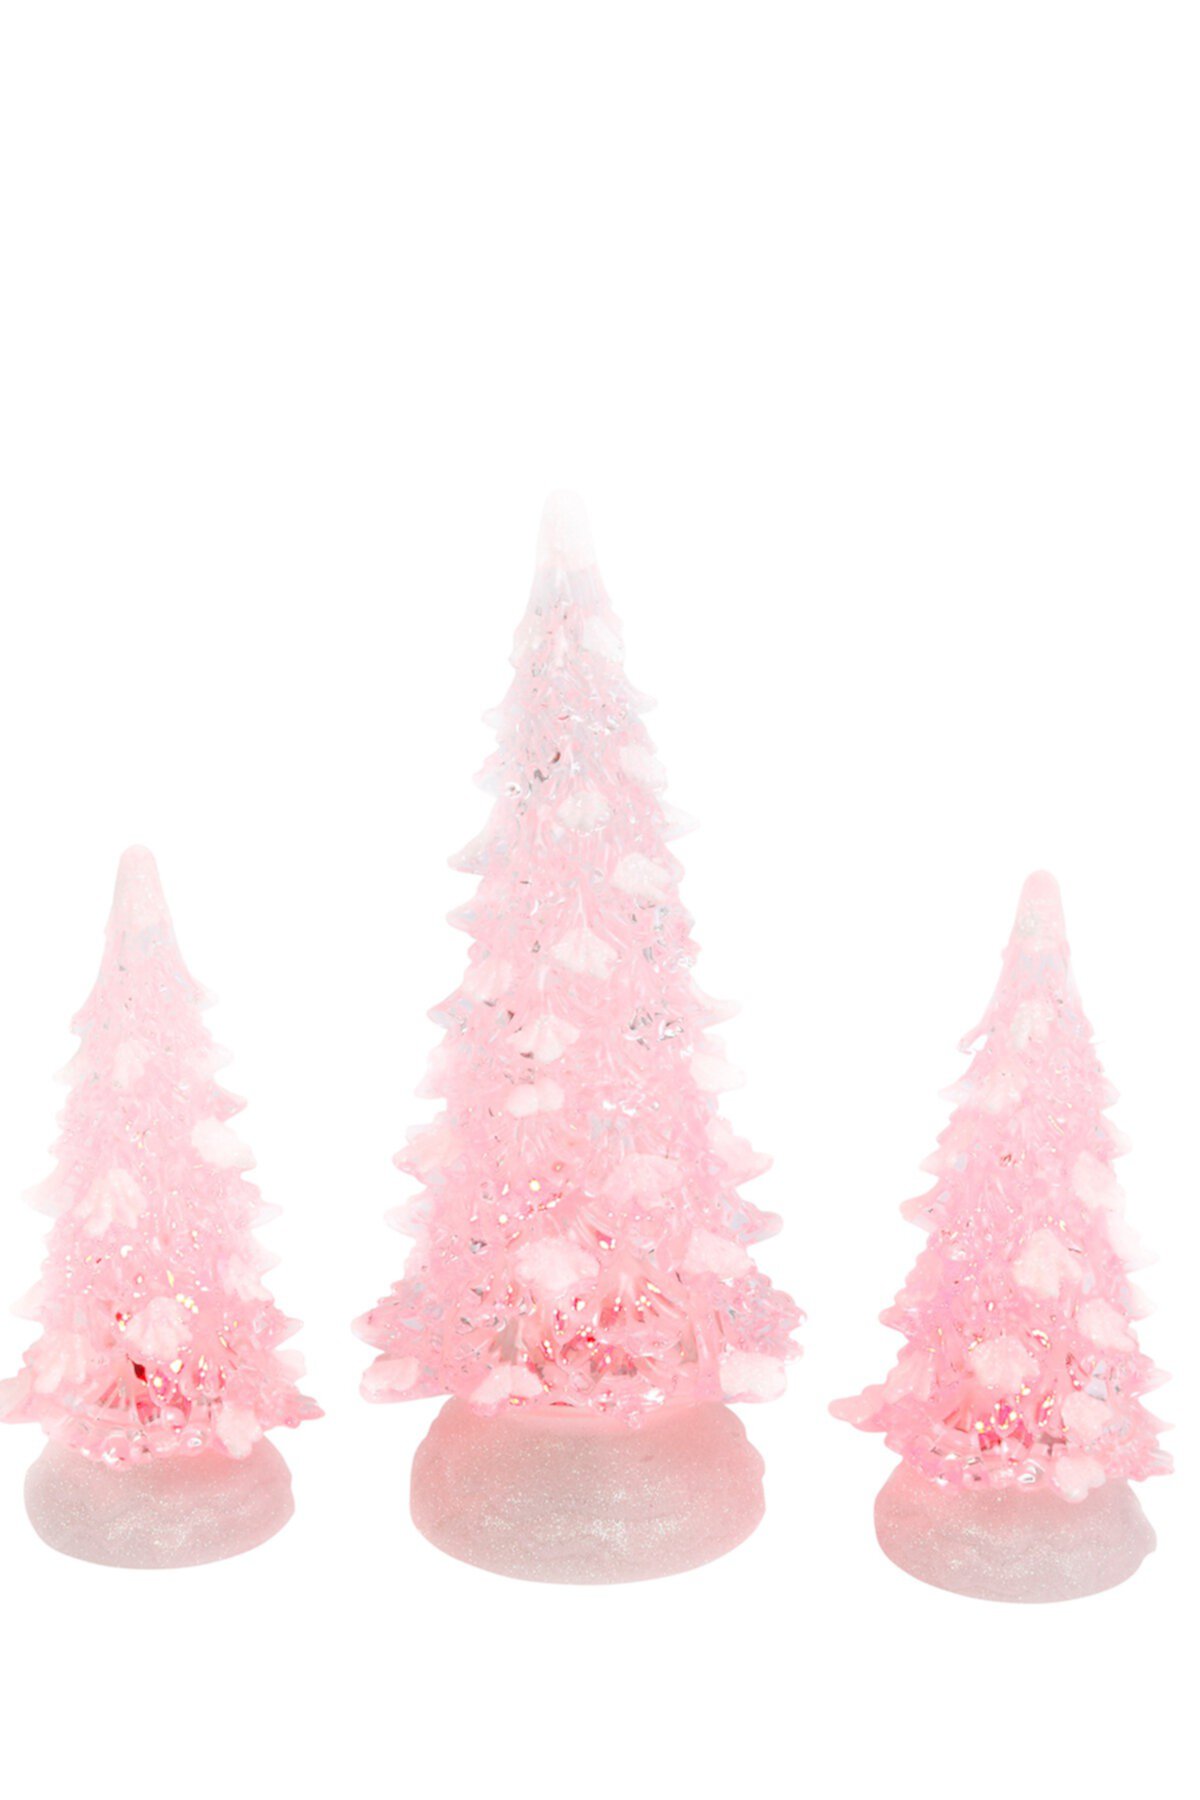 Lighted Color Changing Acrylic Holiday Trees with Timer & Remote Control - Set of 3 Gerson Company